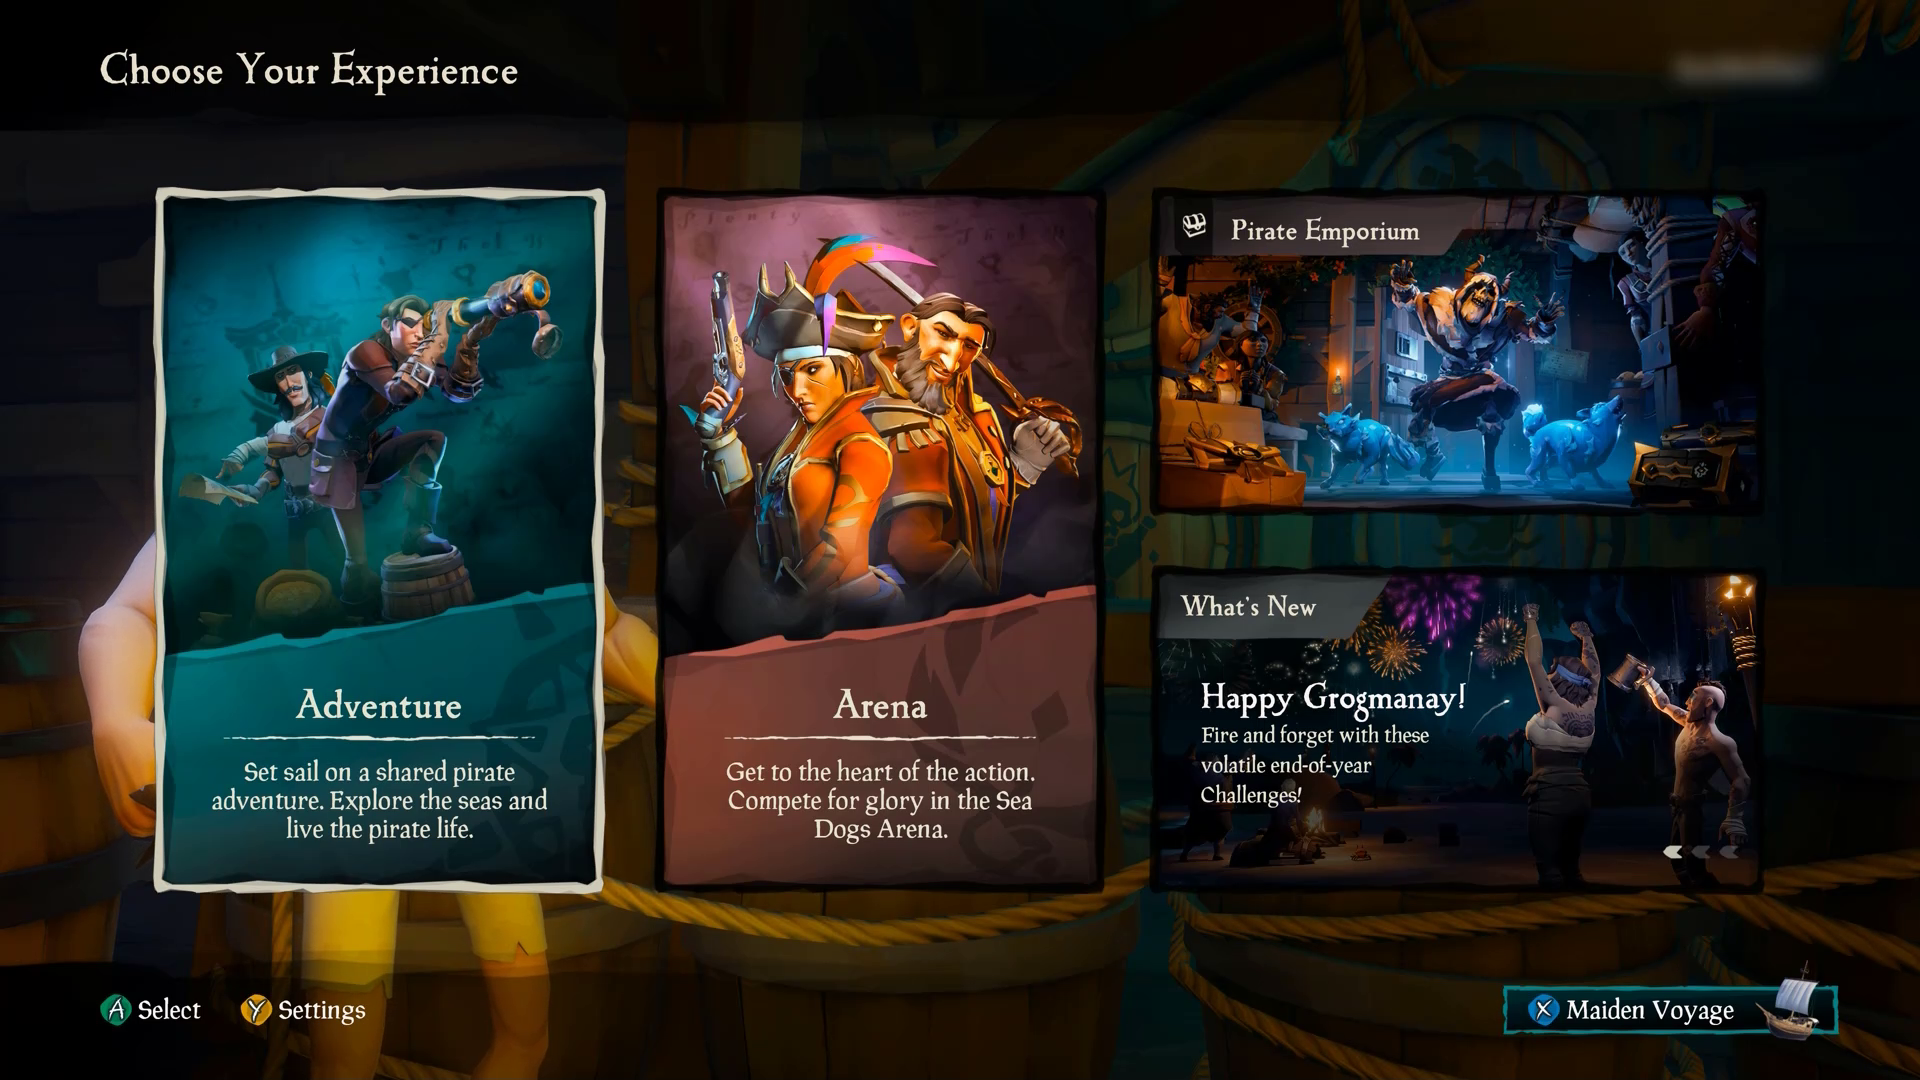 Screenshot of Sea of Thieves game showing Choose Your Experience - Adventure being selected. 